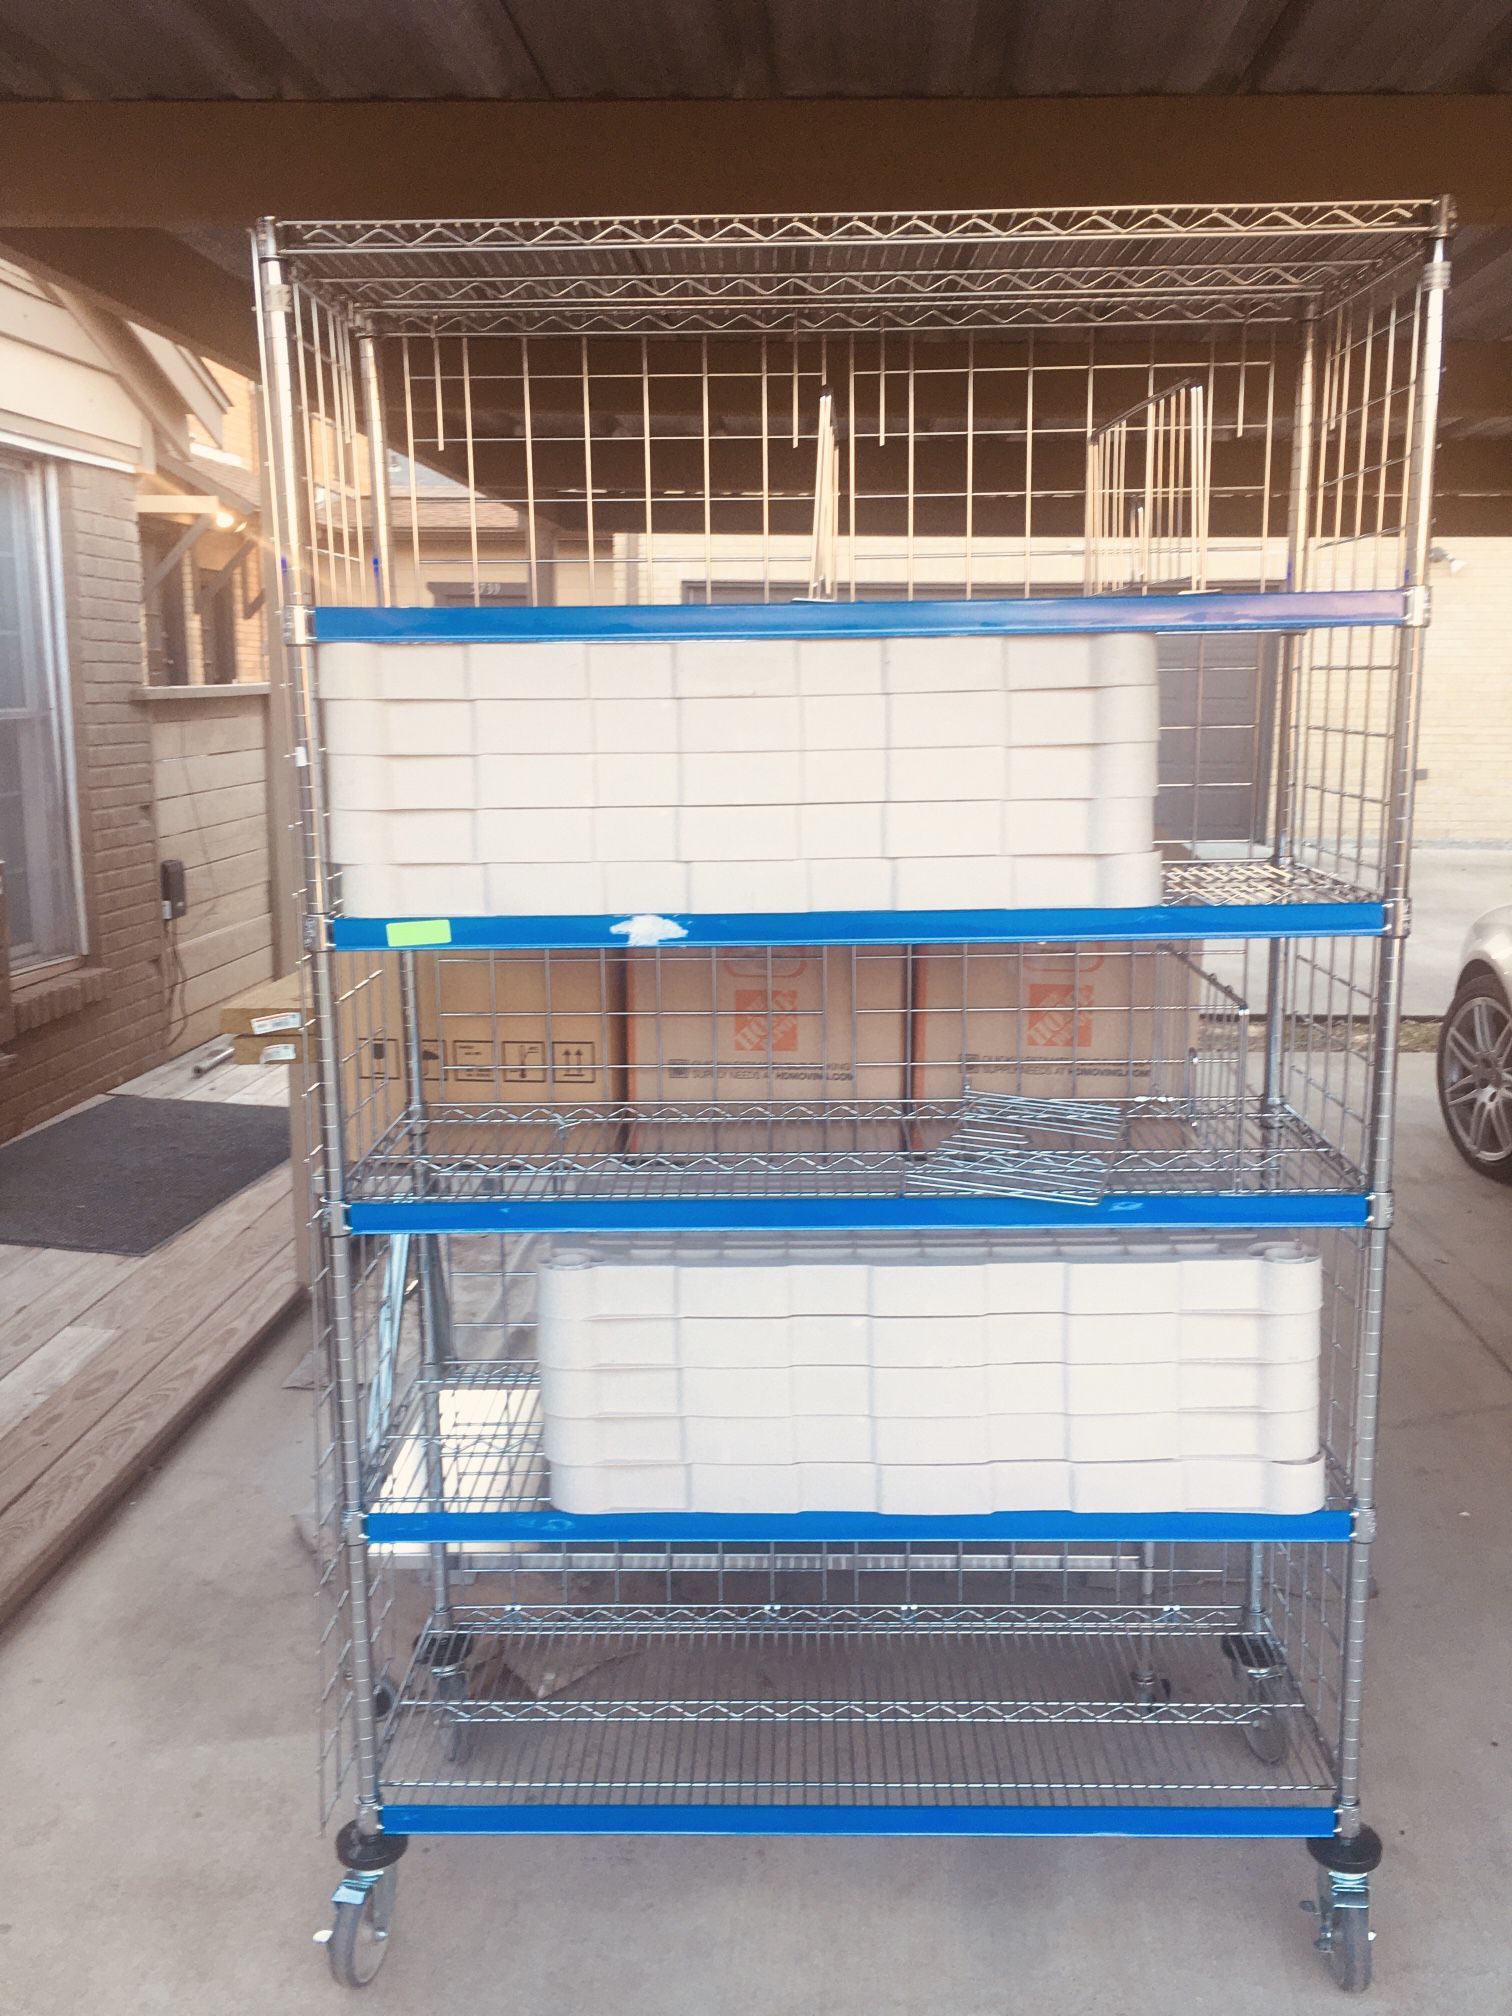 AkroBin Wire Shelving System with Blue Bins